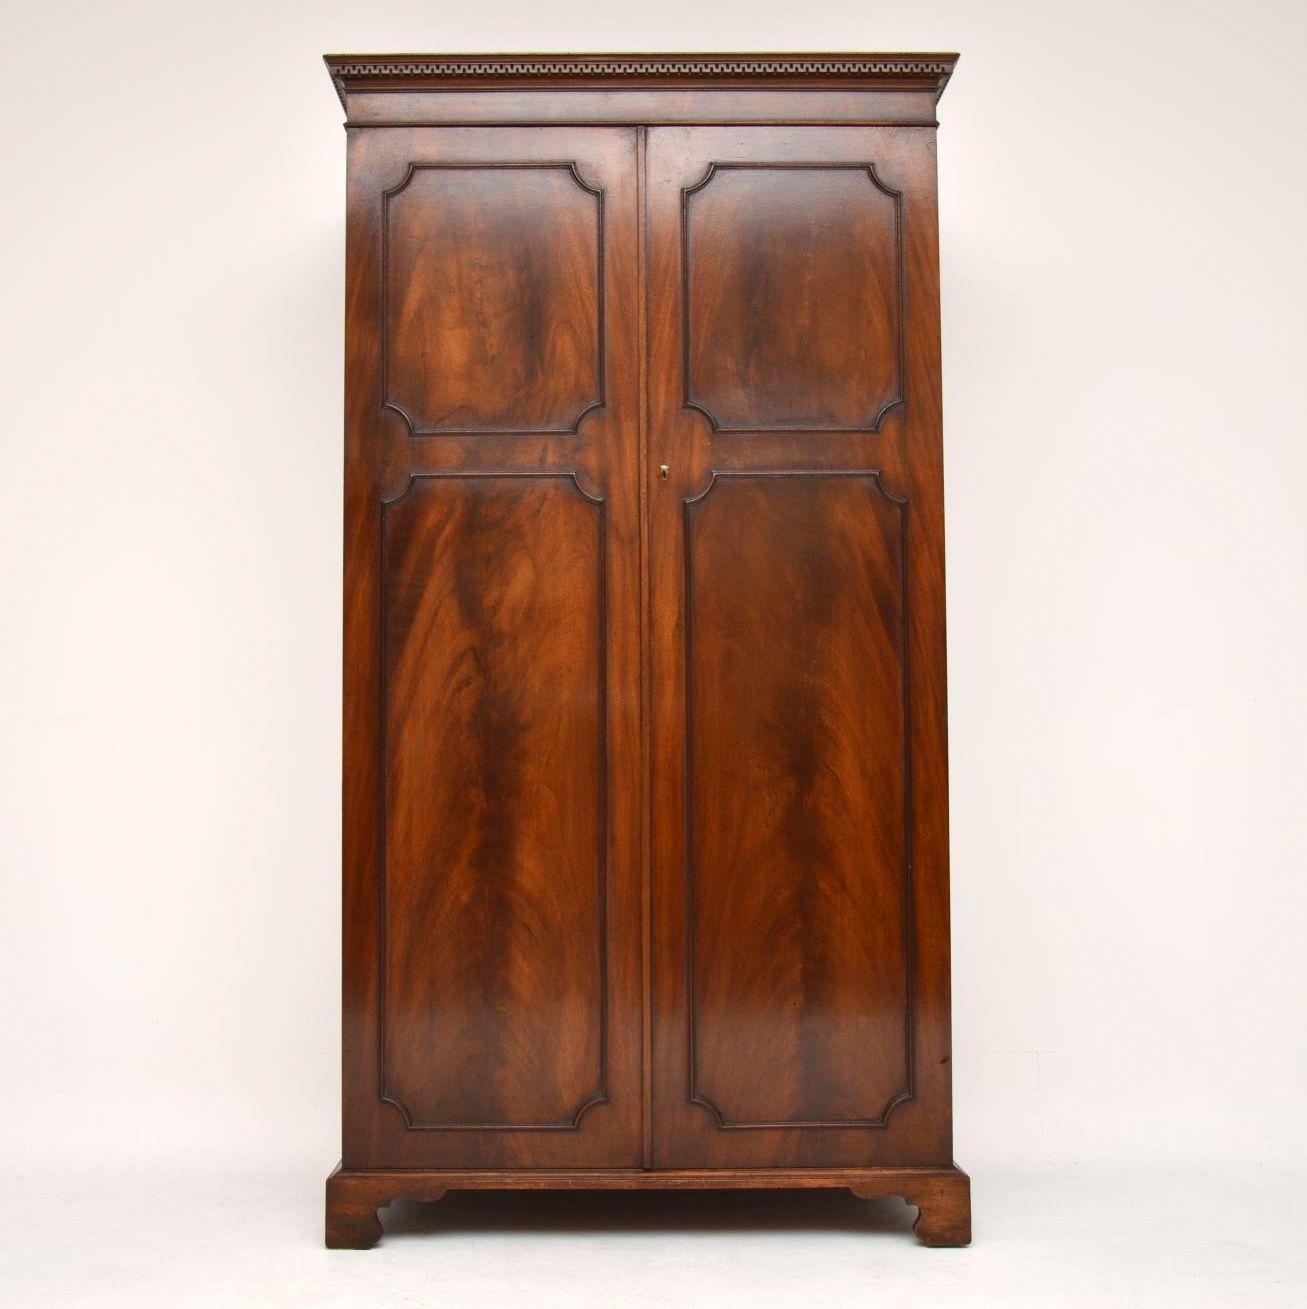 This antique mahogany two door wardrobe has nice small proportions, so could be used in a bedroom or a hall. It's in good original condition and the mahogany finish has a wonderful color and rich patina. The top cornice has a deep Greek key moulding